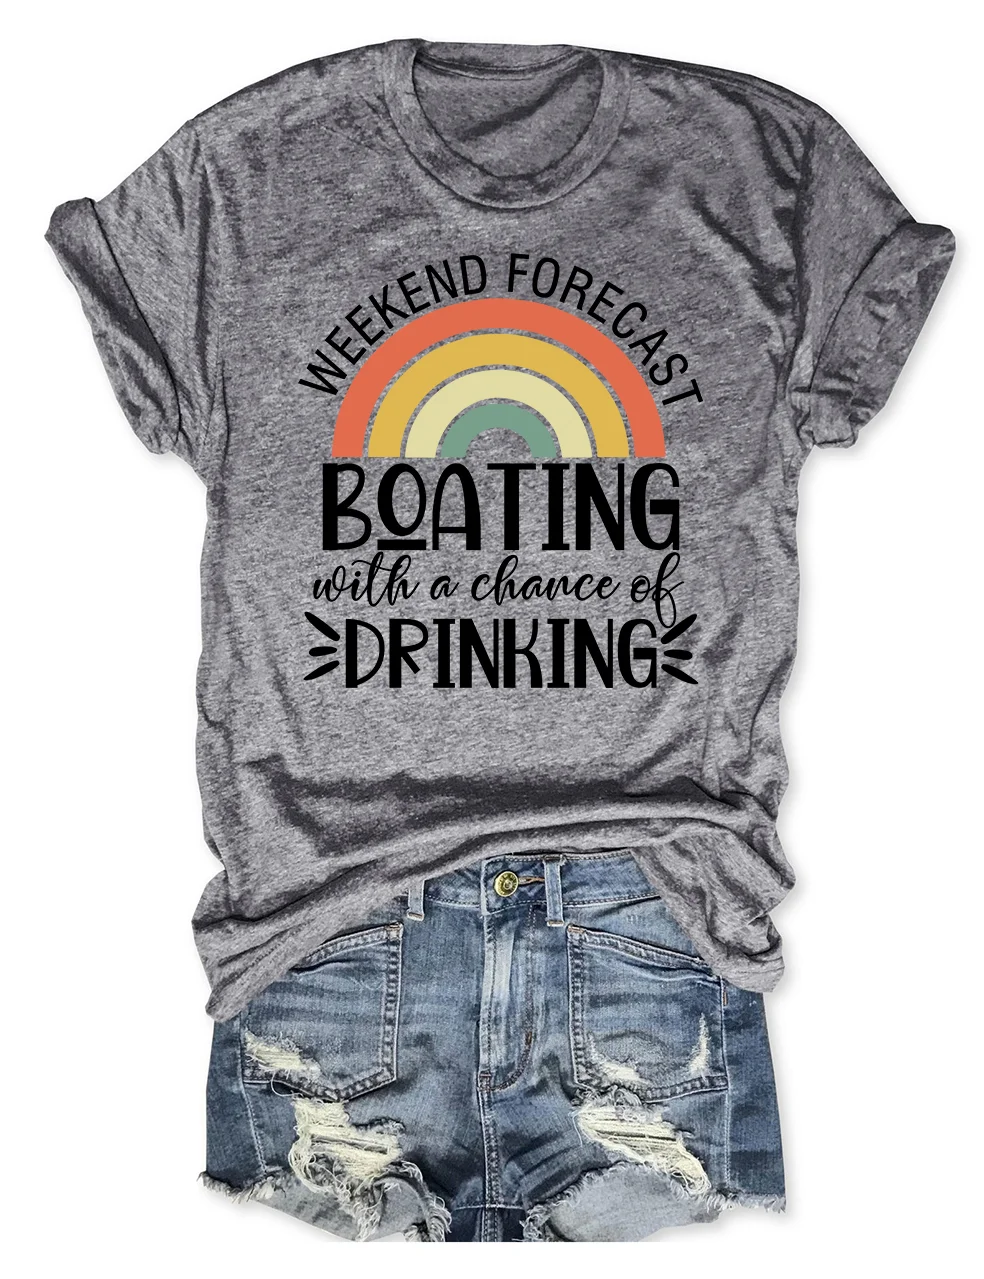 Weekend Forecast Boating With A Chance Of Drinking T-Shirt